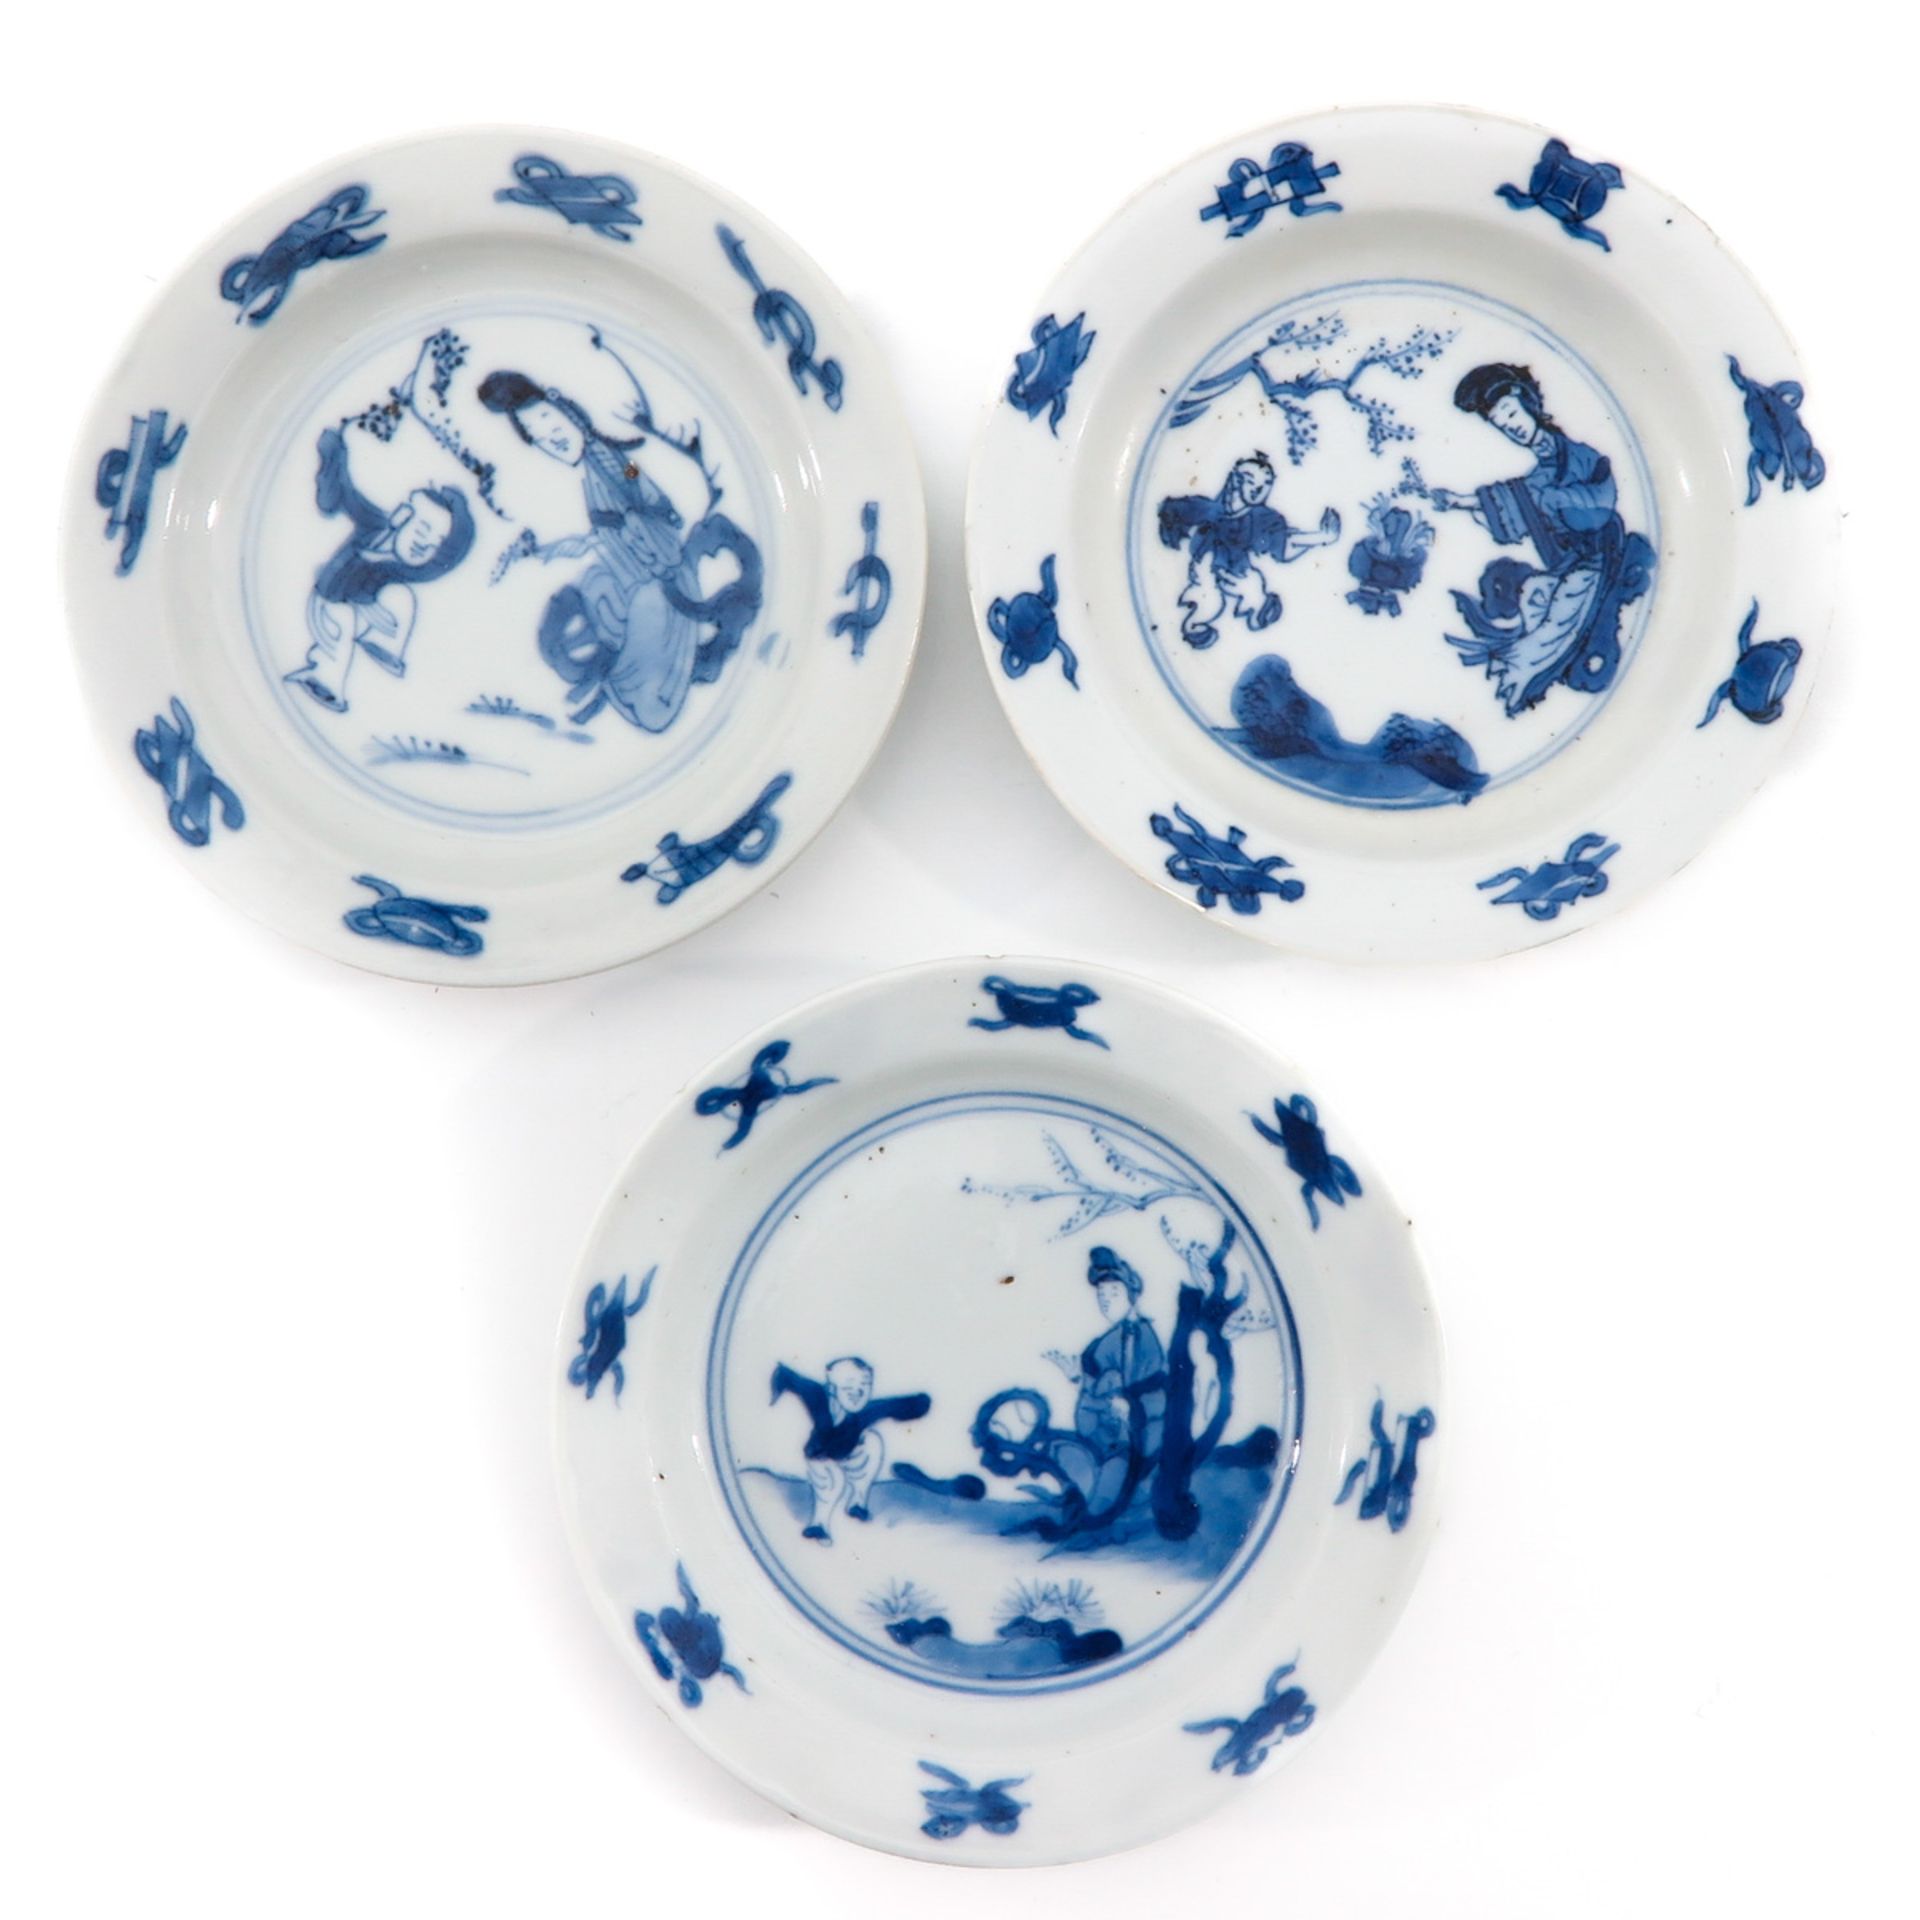 A Series of 3 Small Blue and White Plates